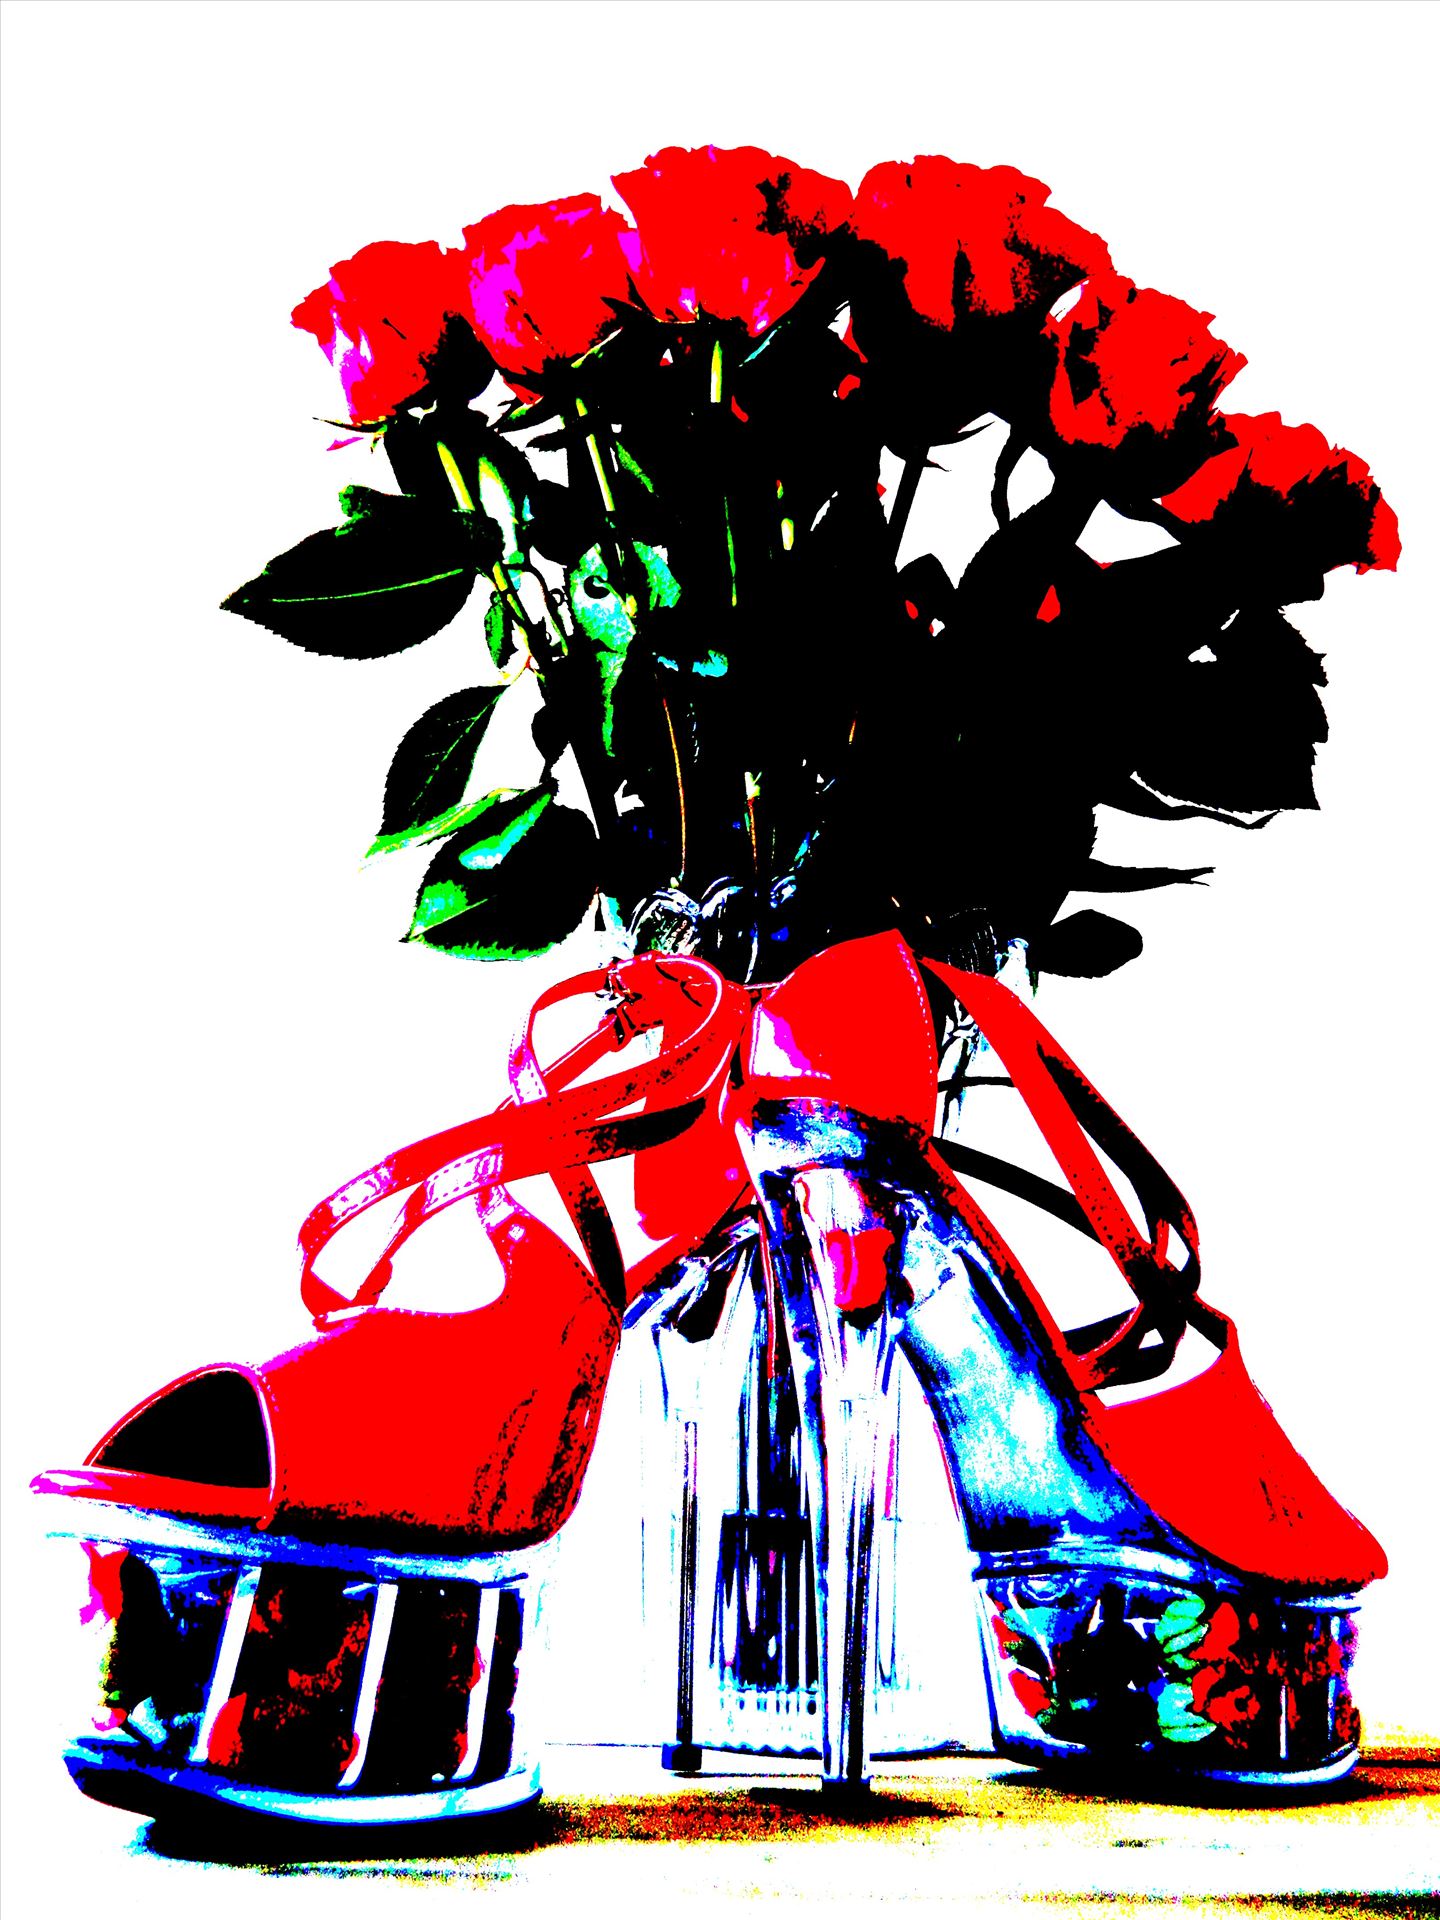 High Heels and Red Roses - Pop Art Image of Red Roses and Red High Heel shoes by PopArtMediaProductions